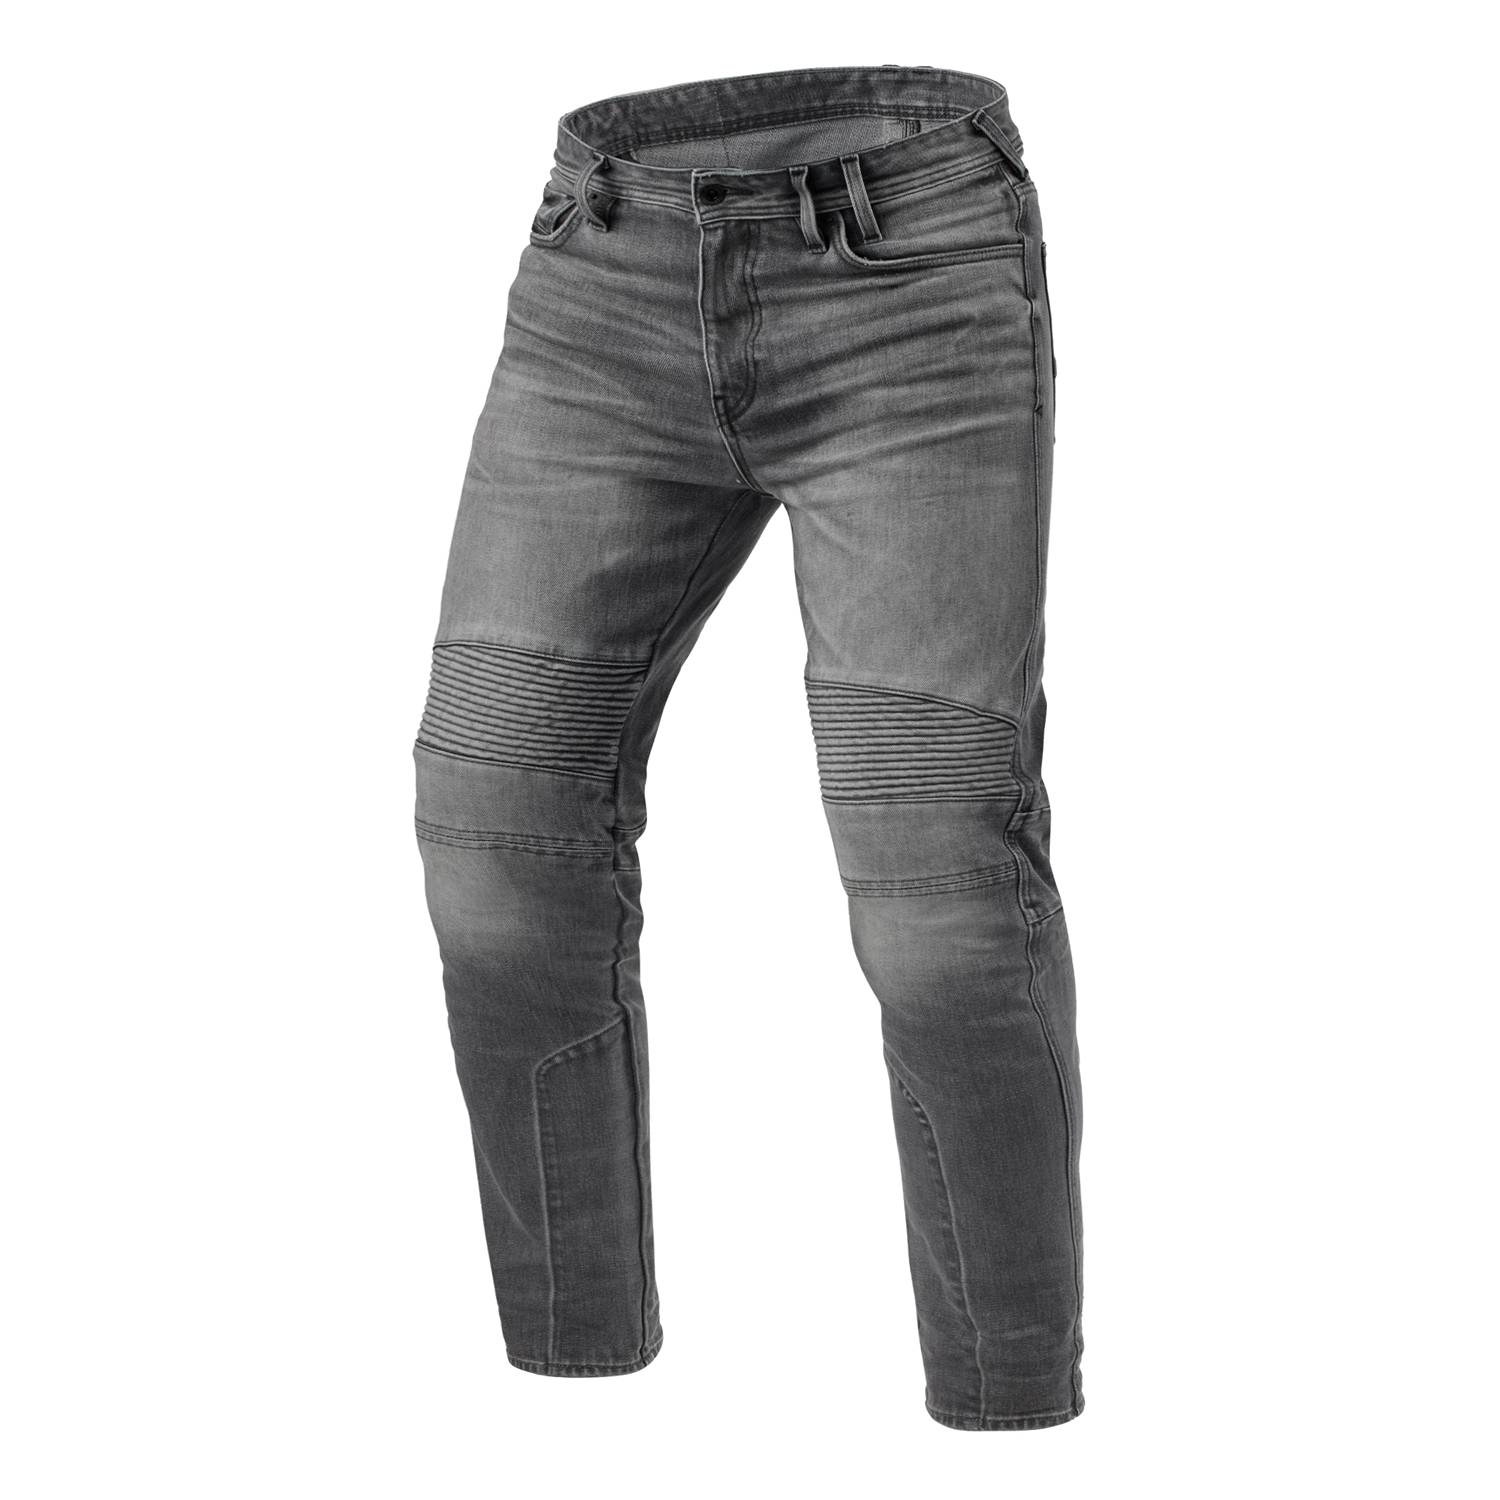 Image of EU REV'IT! Jeans Moto 2 TF Medium Grey Used L36 Motorcycle Jeans Taille L36/W38